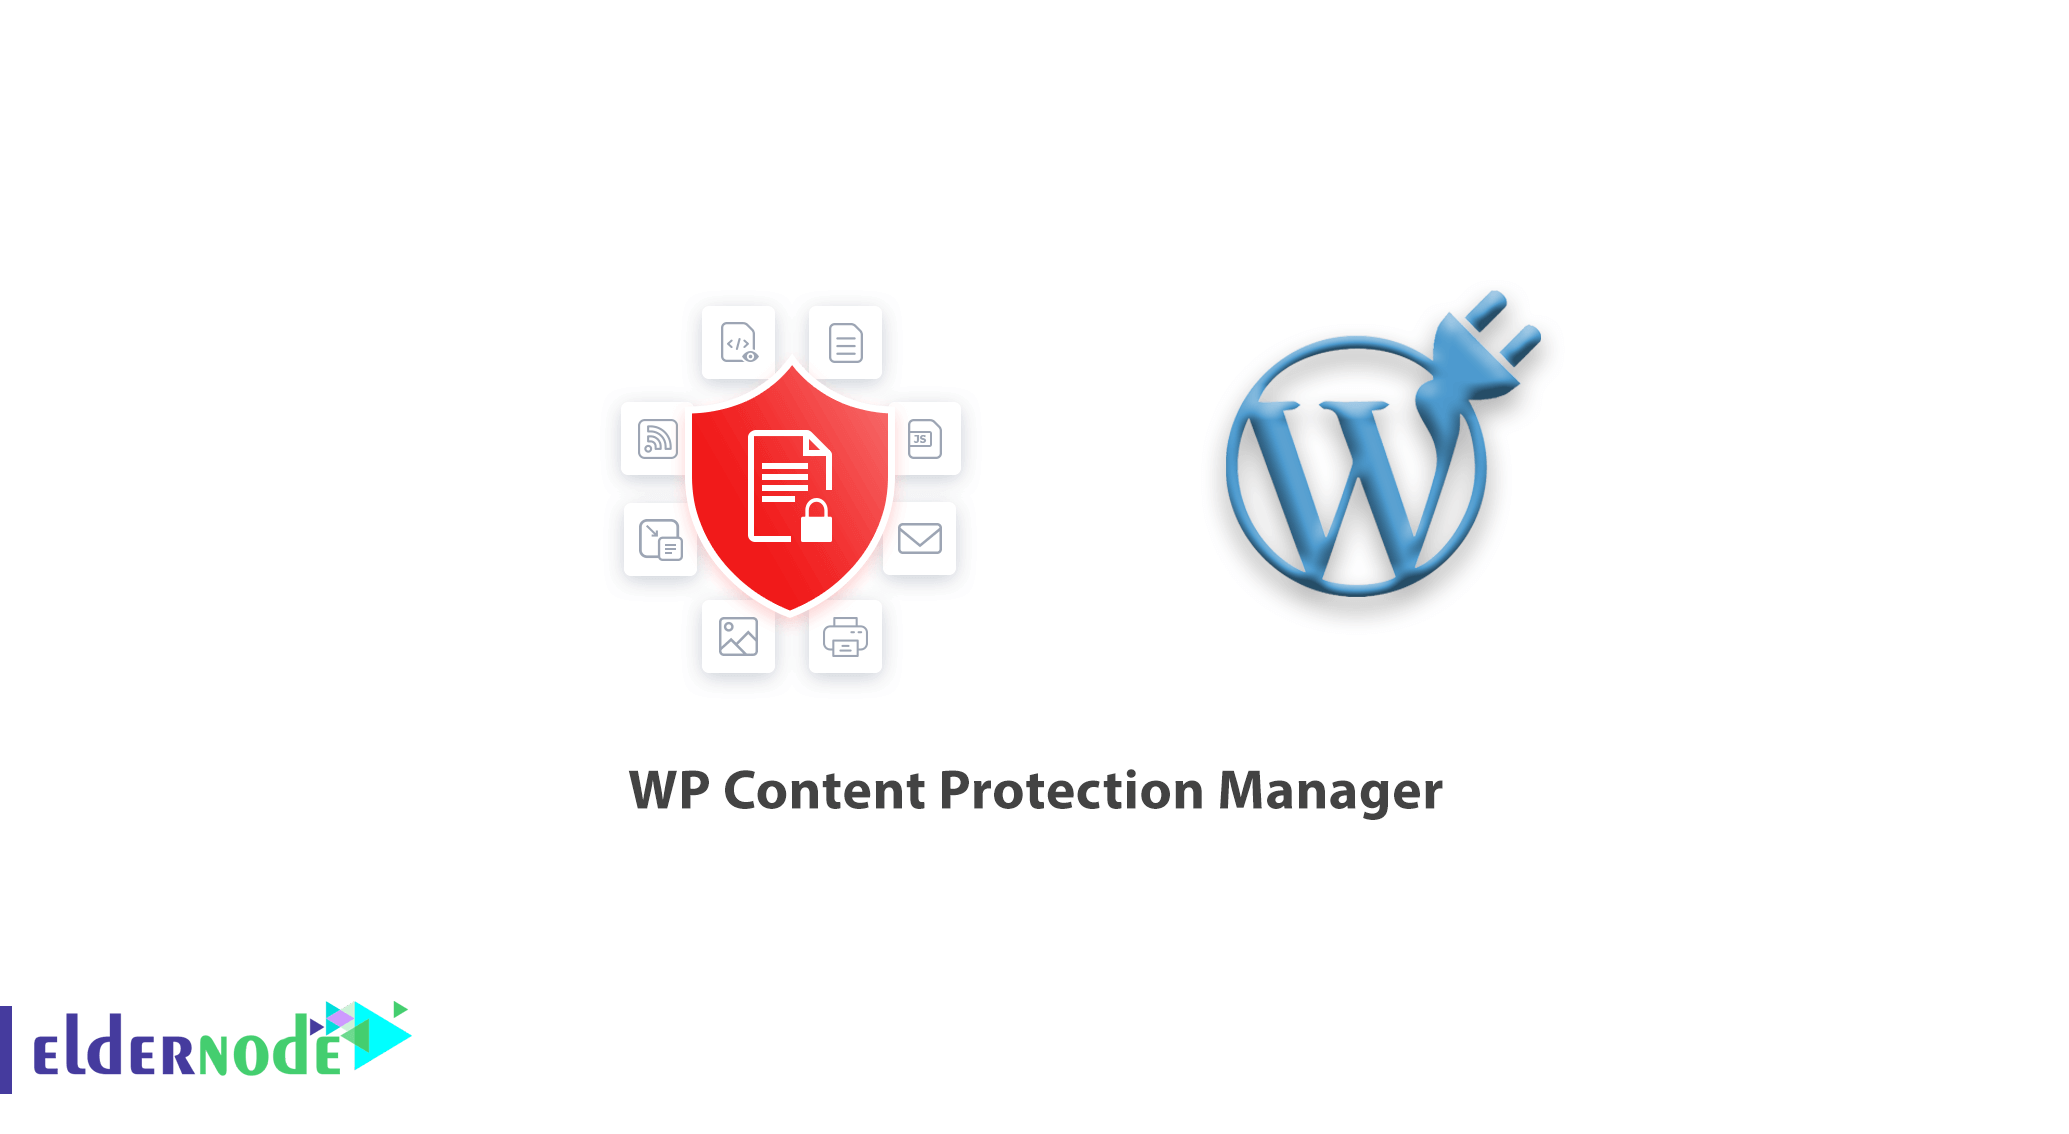 WP Content Protection Manager